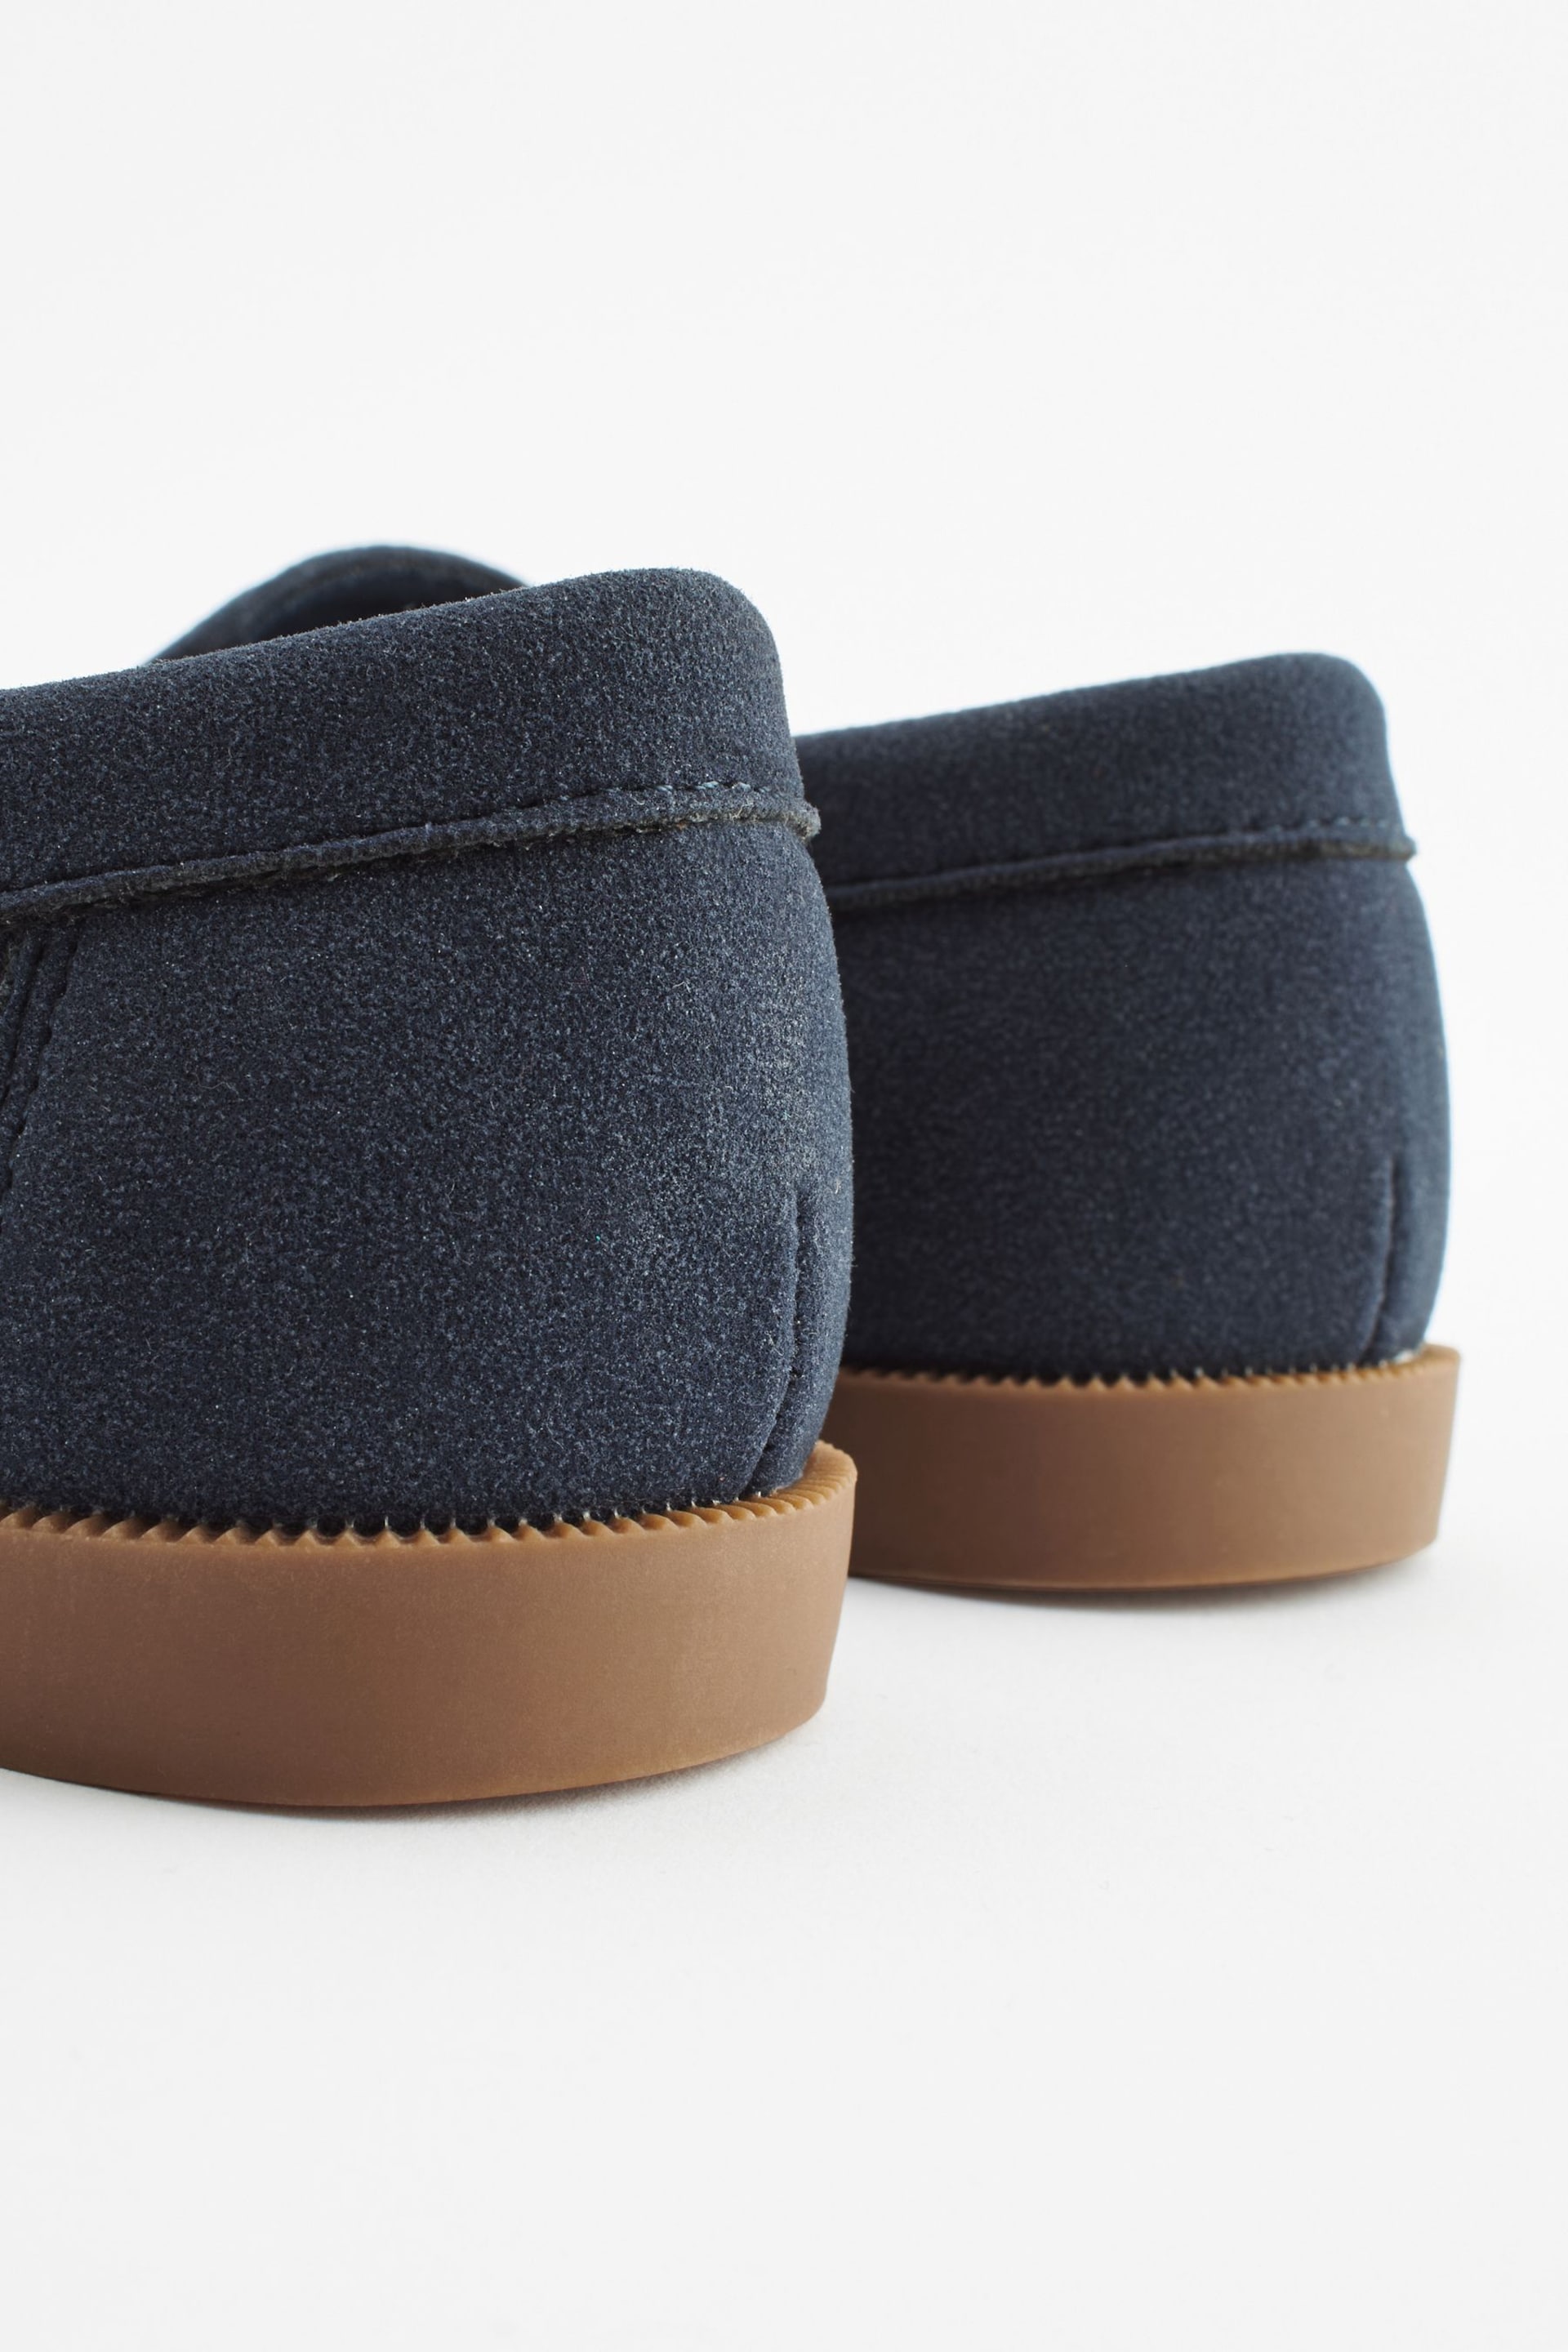 Navy Loafers - Image 3 of 7